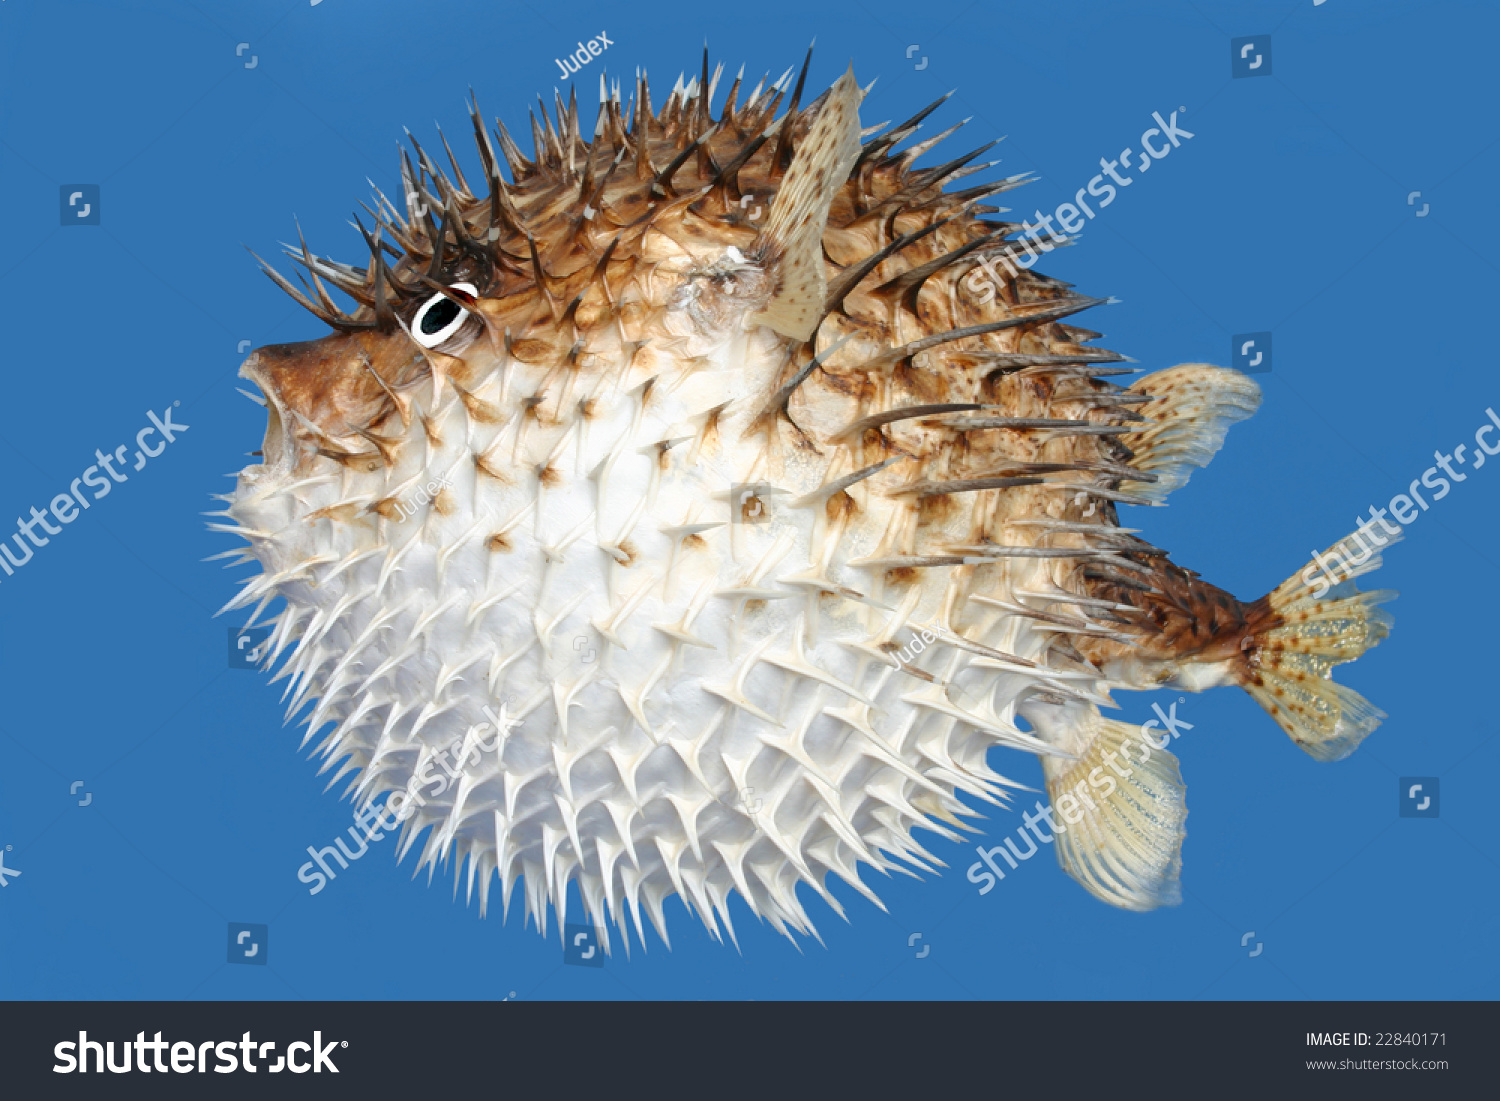 Side View Of A Porcupine Fish, Isolated On A Blue Background. Stock Photo 22840171 : Shutterstock